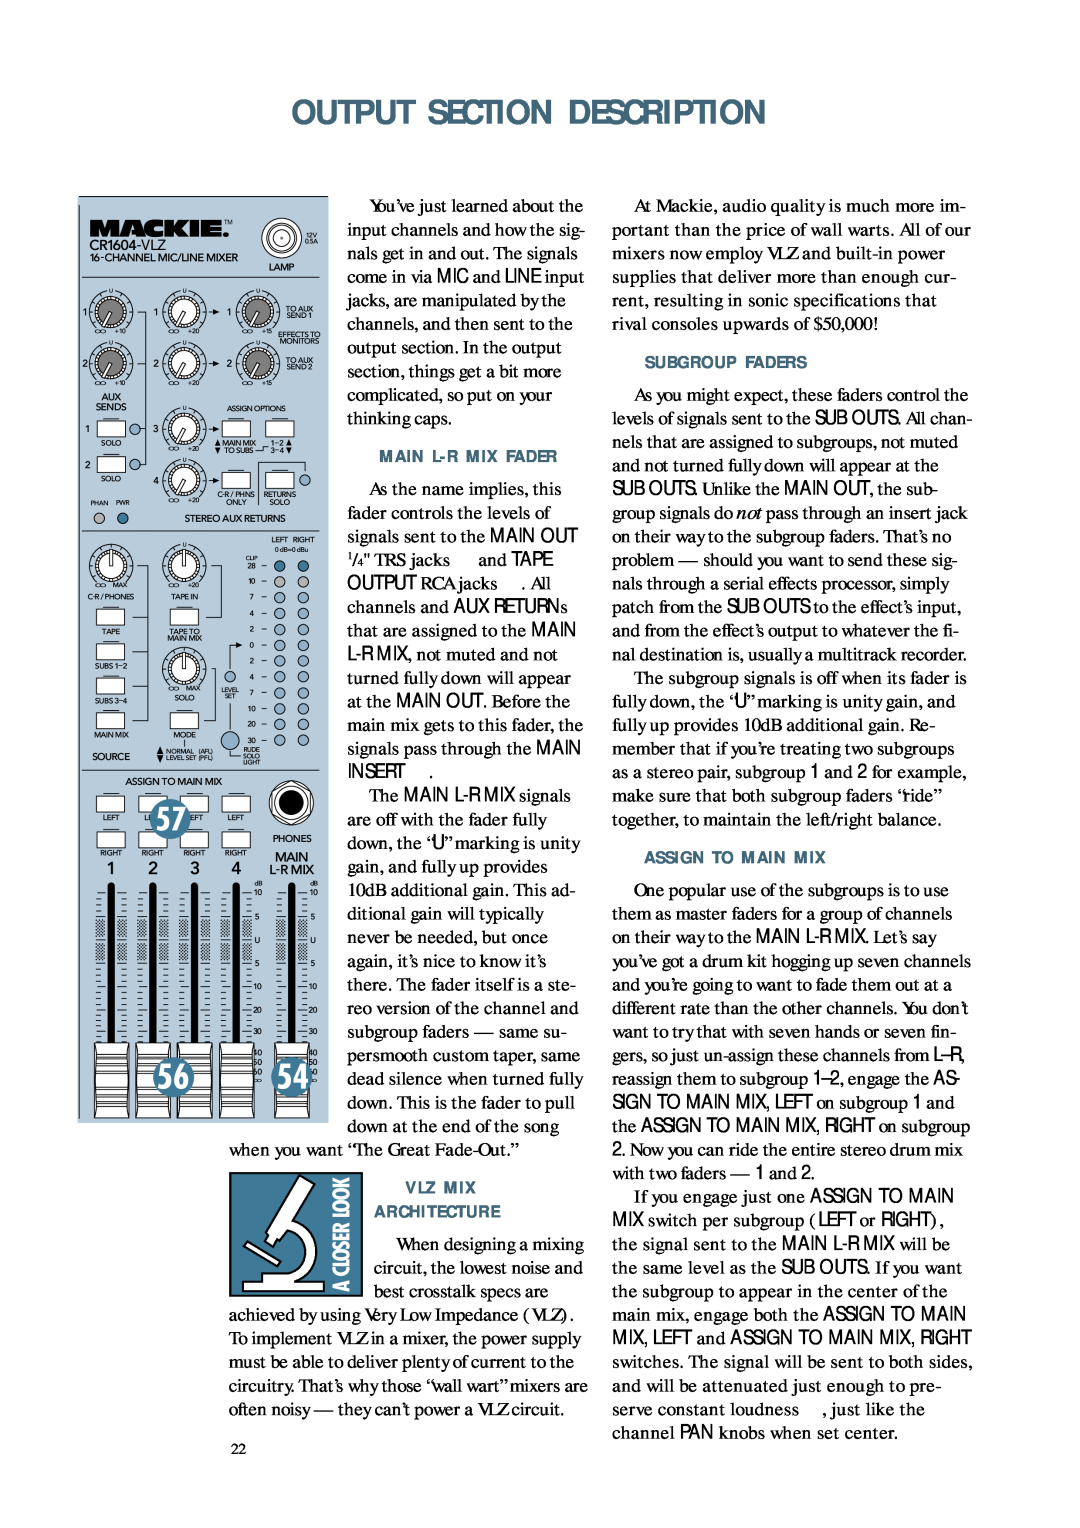 Mackie CR1604 - VLZ Output Section Description, Vlz Mix Architecture, Subgroup Faders, Assign To Main Mix, and TAPE 